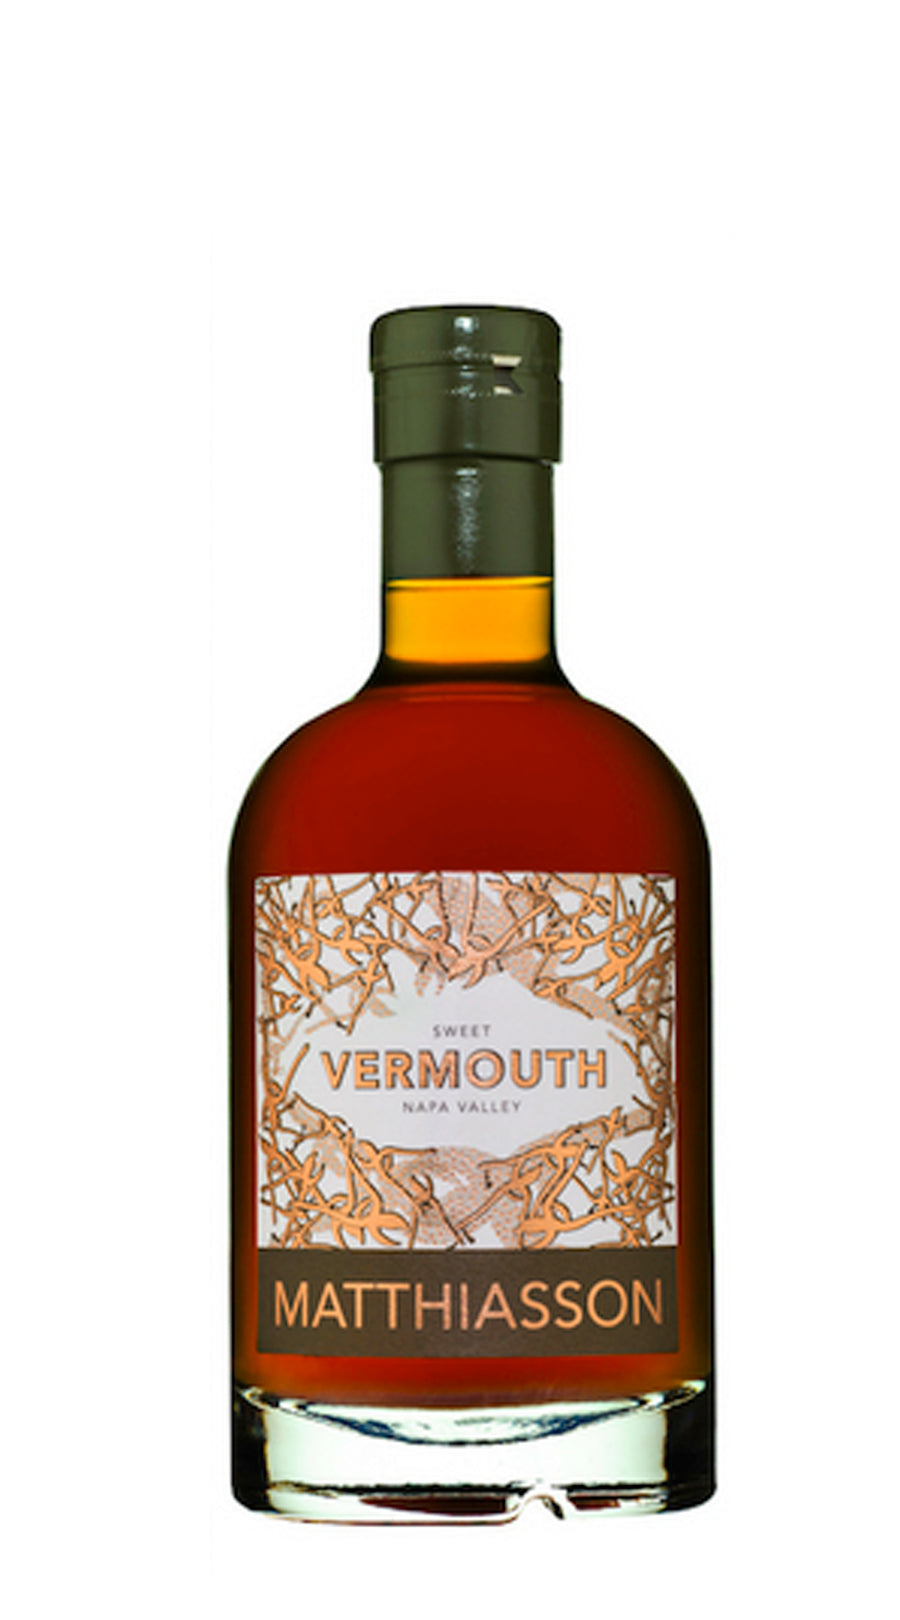 Matthiasson Limited Release #6 Vermouth